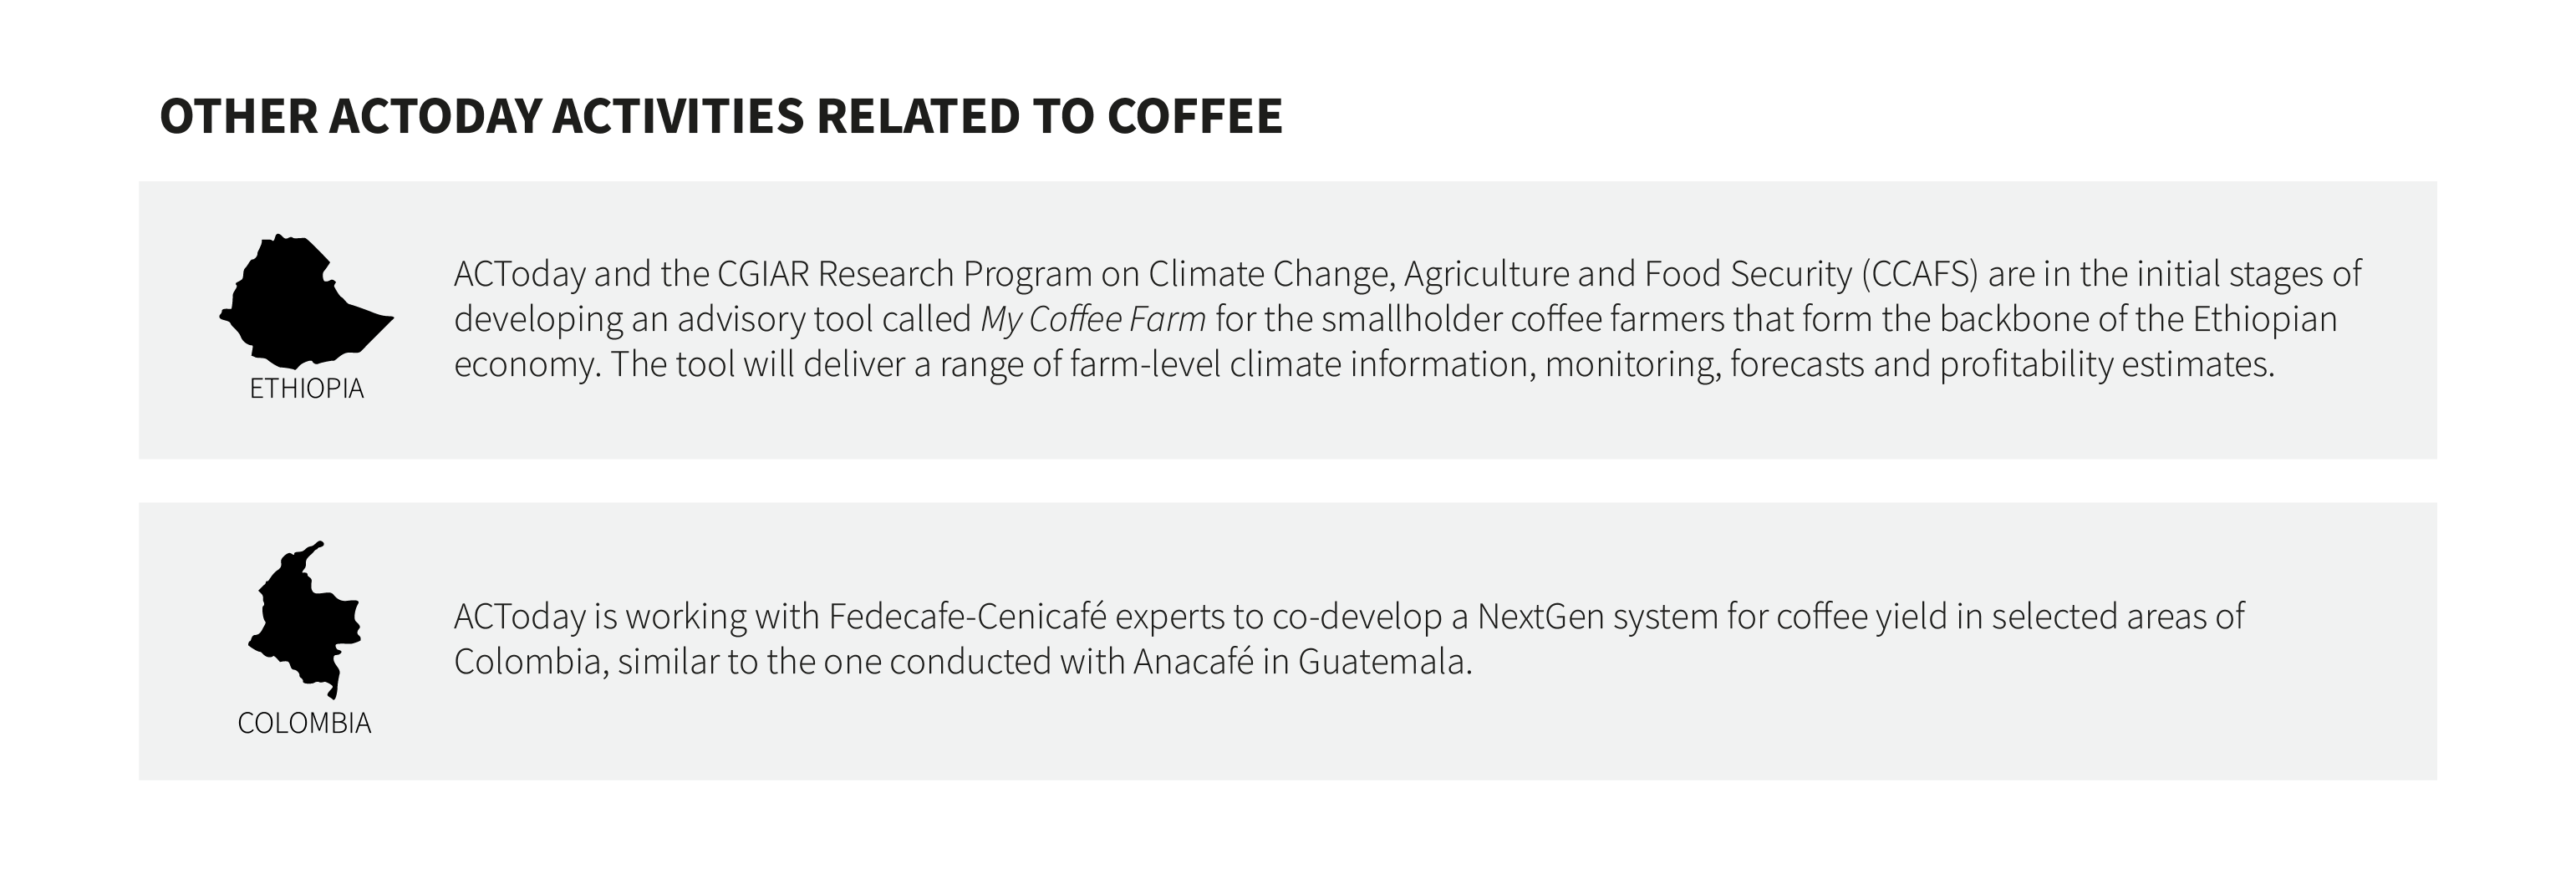 The headline of the graphic reads "Other ACToday activities related to coffee." Two long grey text boxes are stacked below the headline. In the top box is the black silhouette of the country of Ethiopia and the text "ACToday and the CGIAR Research Program on Climate Change, Agriculture and Food Security (CCAFS) are in the initial stages of developing an advisory tool called My Coffee Farm for the smallholder coffee farmers that form the backbone of the Ethiopian economy. The tool will deliver a range of farm-level climate information, monitoring, forecasts and profitability estimates." In the bottom box is the black silhouette of the country of Colombia and the text "ACToday is working with Fedecafe-Centicafé to co-develop a NextGen system for coffee yield in selected areas of Colombia, similar to the one conducted with Anacafé in Guatemala.